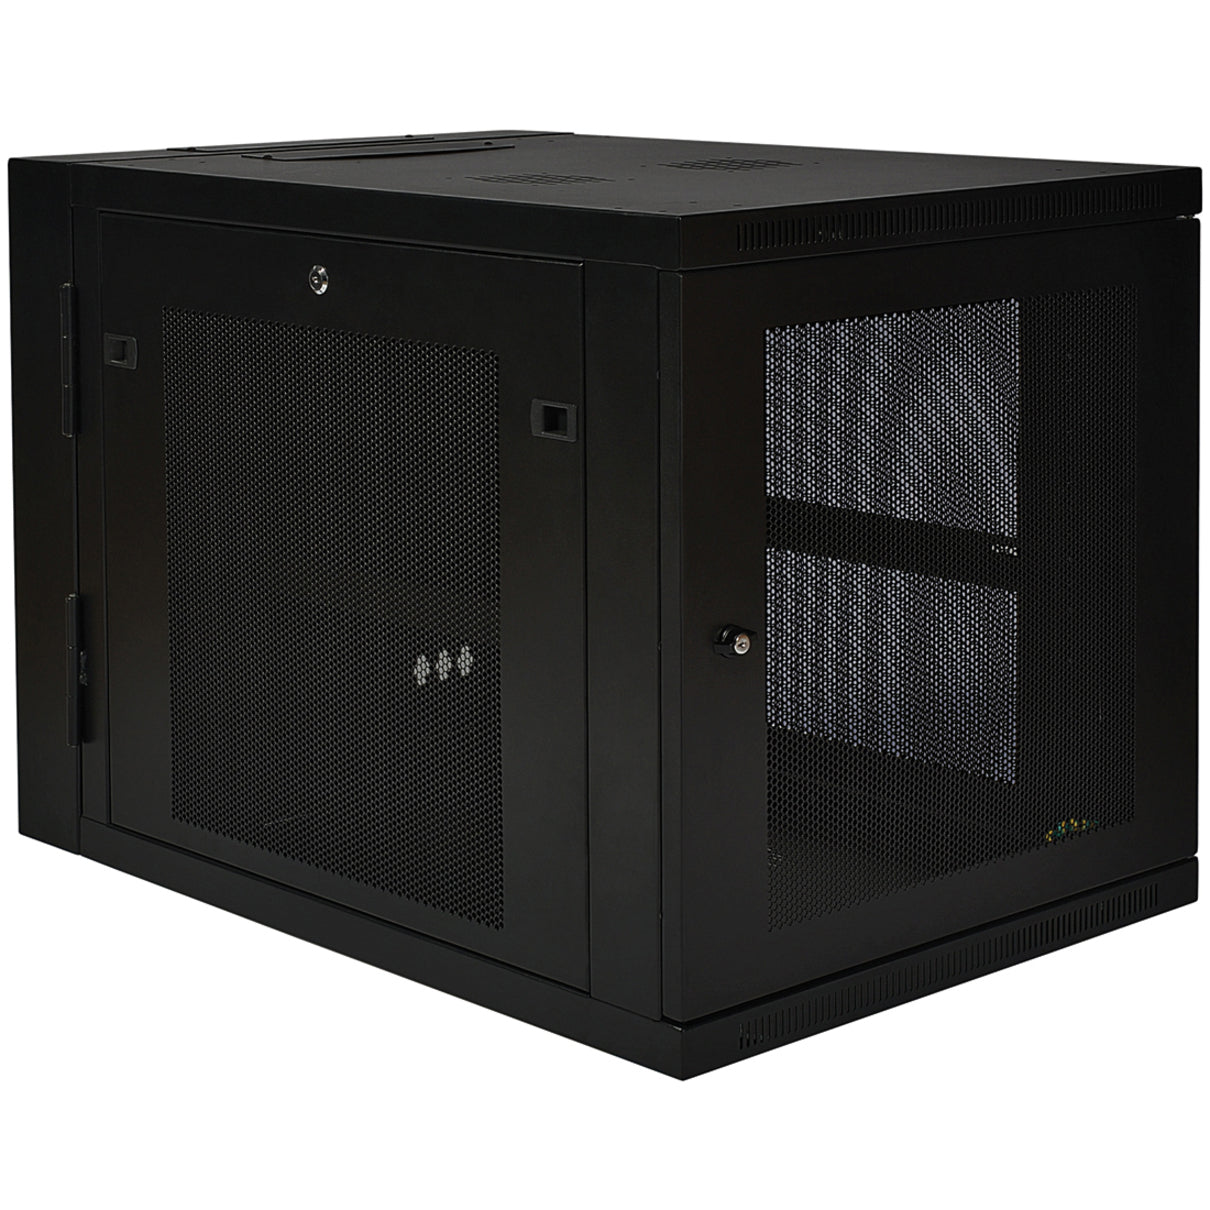 Tripp Lite SRW12US33 SmartRack 12U Wall Mount Rack Enclosure Cabinet with 33" Extended Depth, Ventilated Panels, Easy Access, Fully Assembled